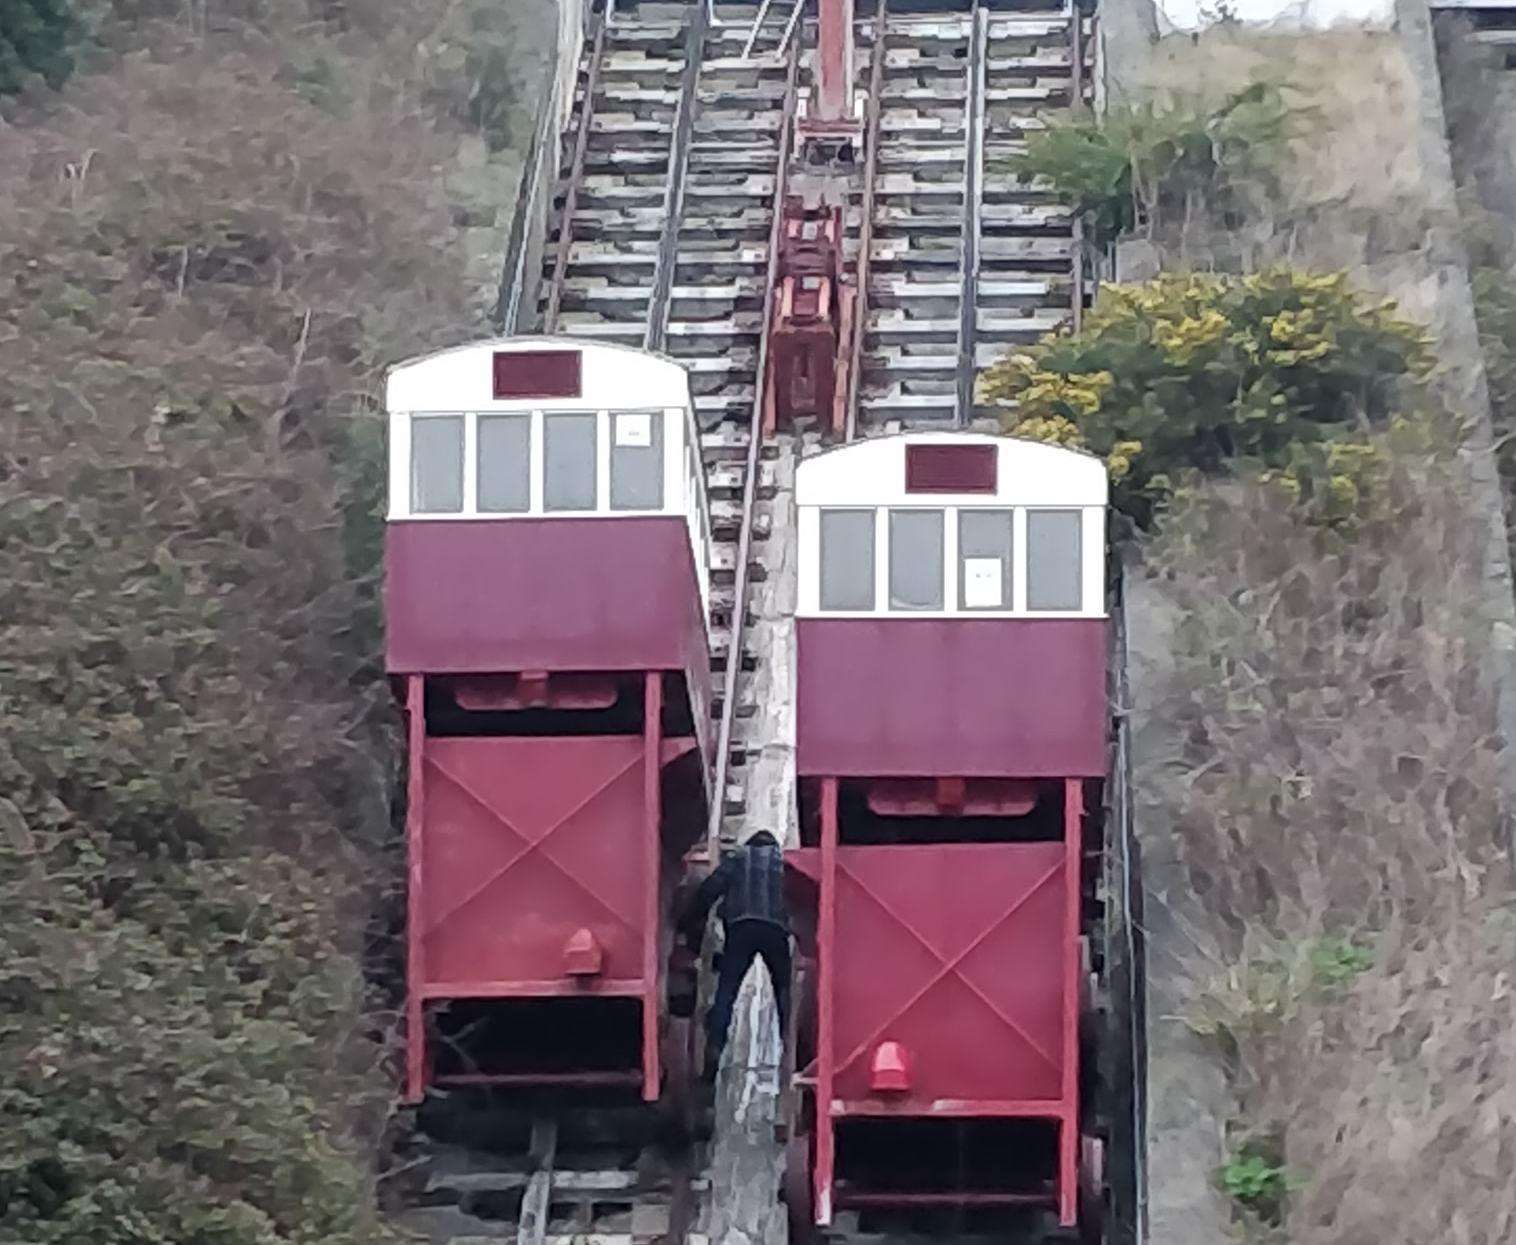 Police confirmed that work is taking place on the Leas Lift today. (6235732)